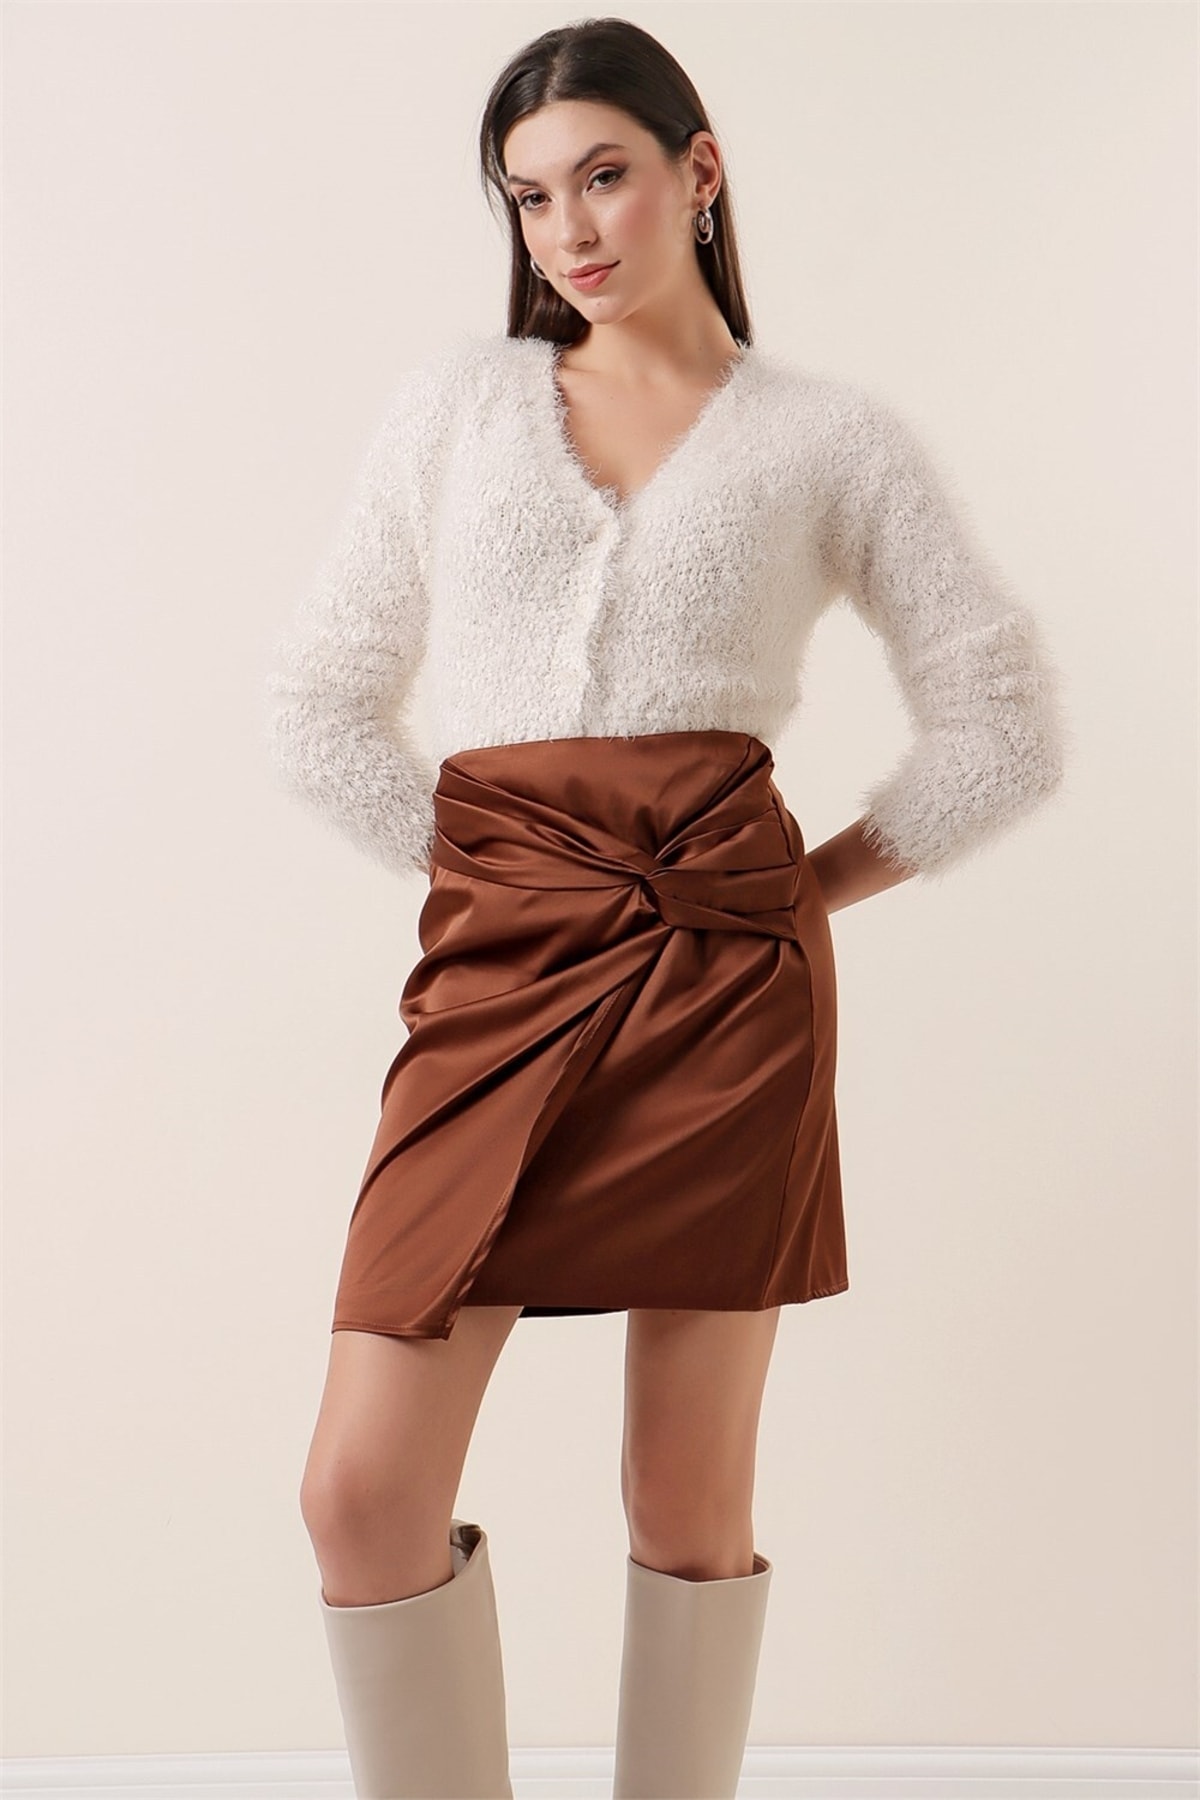 By Saygı Knotted Satin Skirt Brown